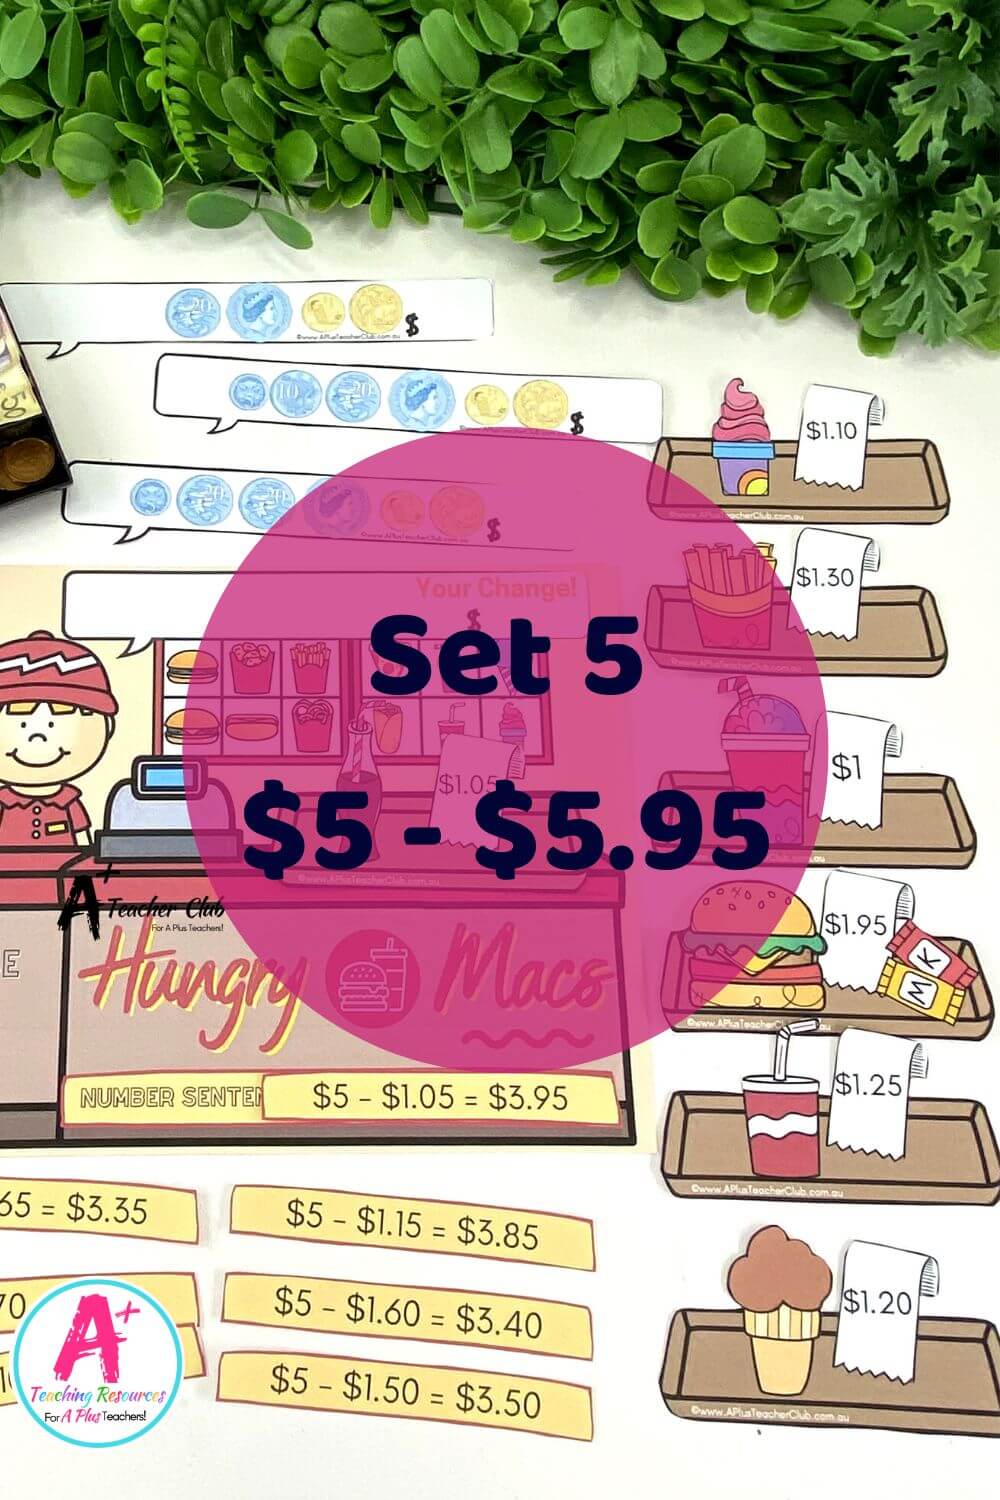 Counting Change Games - Fast Food Set 5 ($5-$5.95)